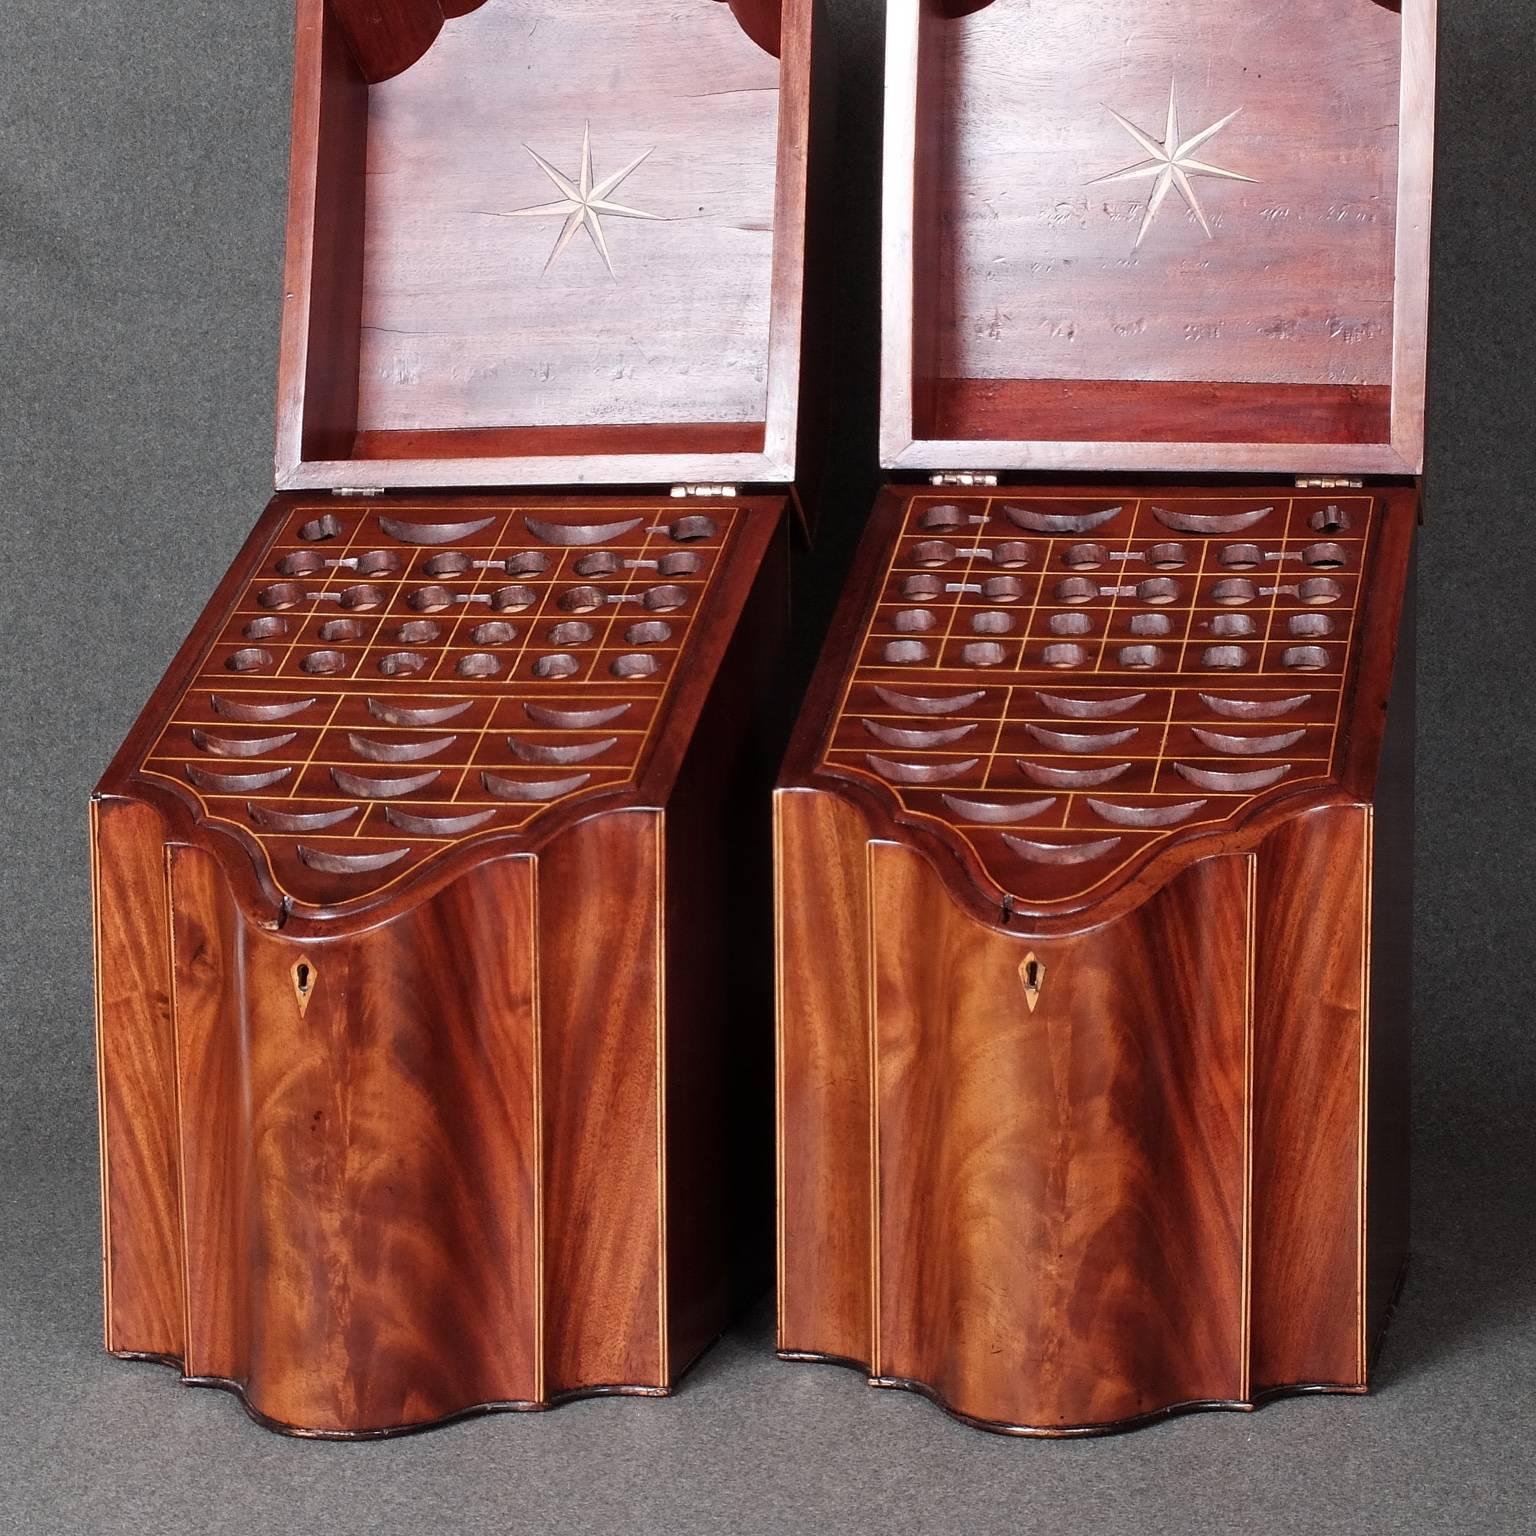 Late 18th Century Pair of Mahogany Knife Boxes George III Mahogany English Country House Antique For Sale